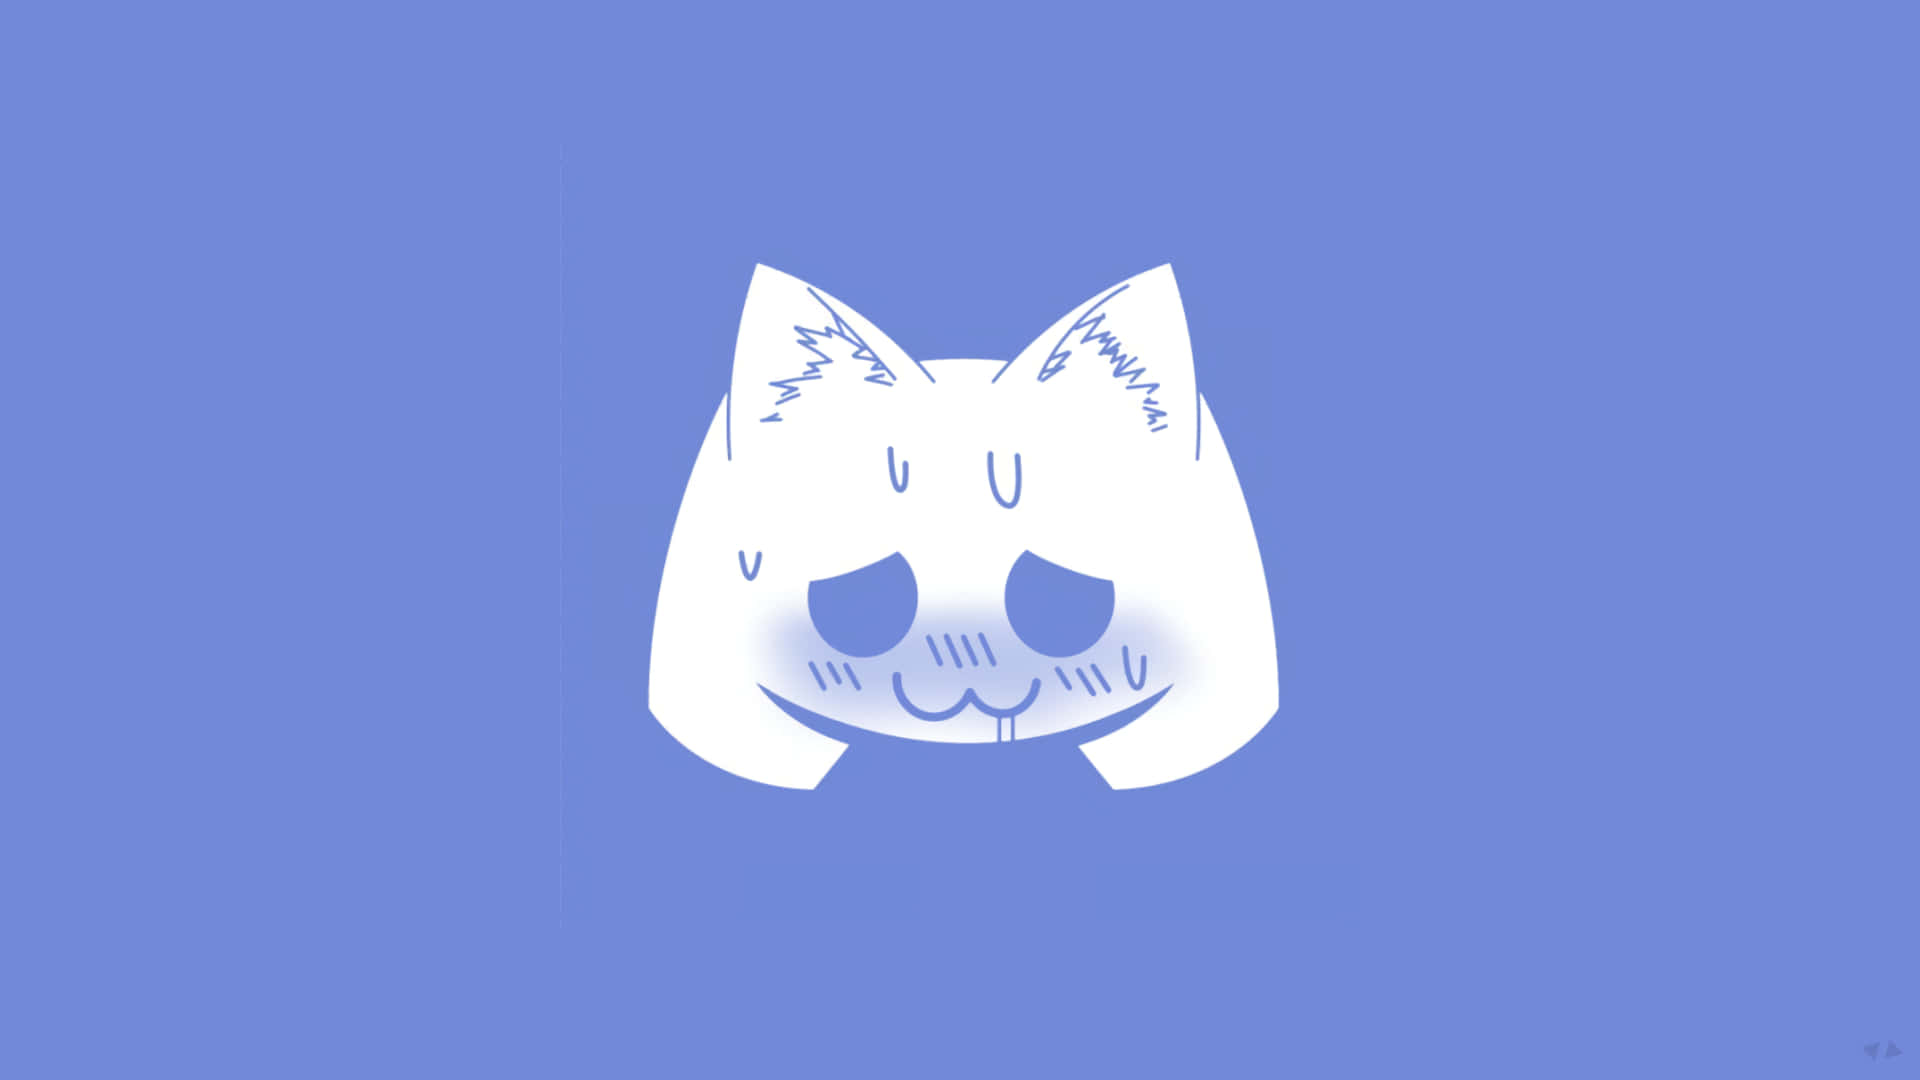 Cool Discord Logo With Cat Ears Wallpaper